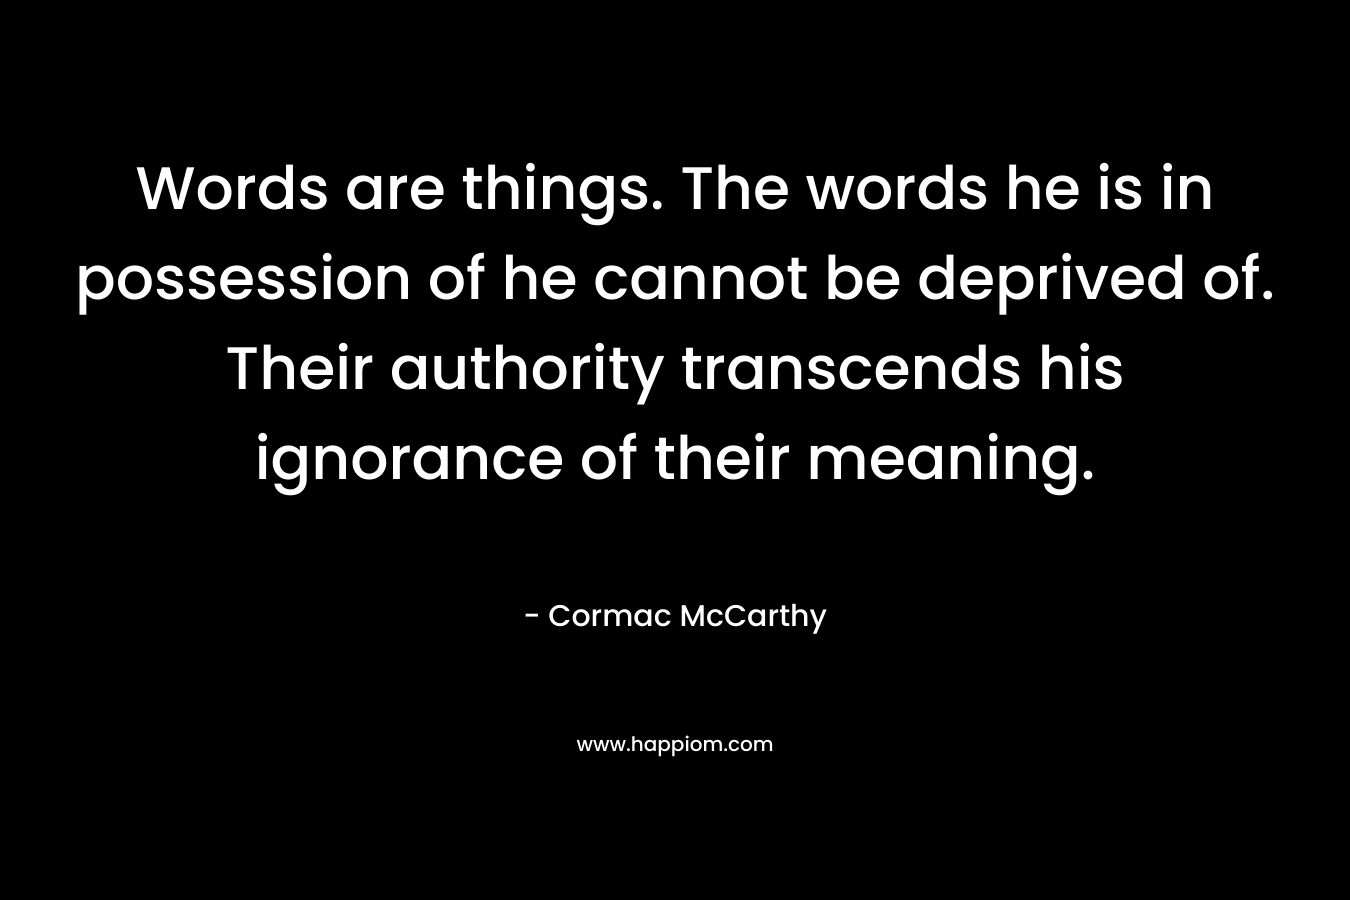 Words are things. The words he is in possession of he cannot be deprived of. Their authority transcends his ignorance of their meaning. – Cormac McCarthy